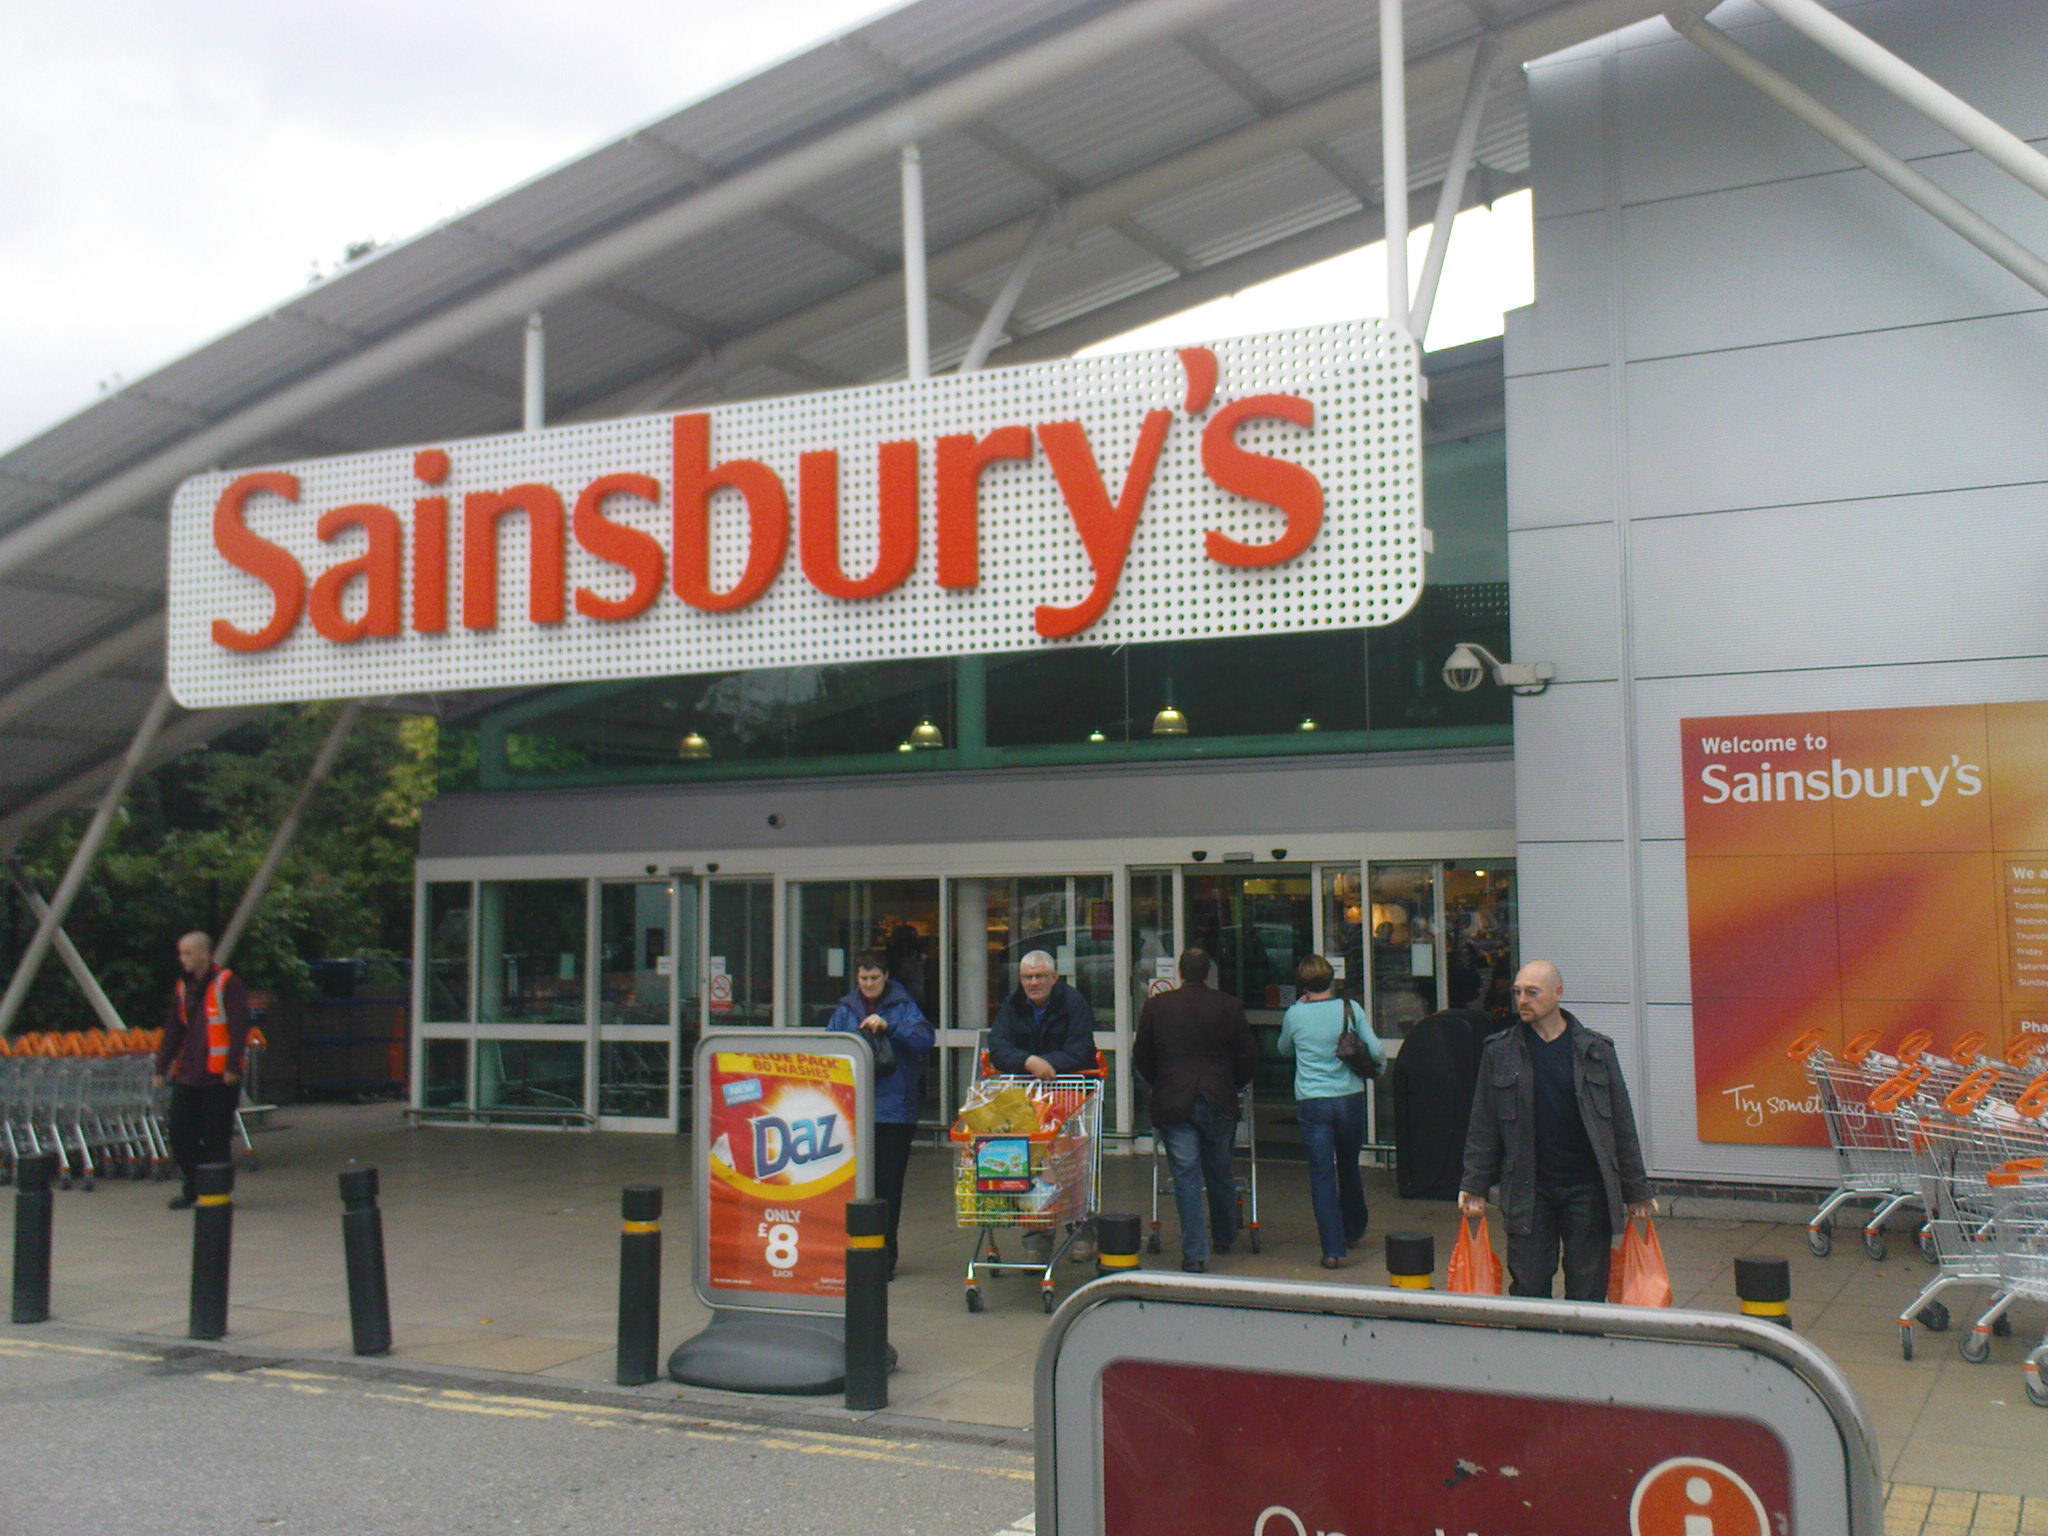 Sainsbury's commits to £1 billion to become Net Zero by 2040